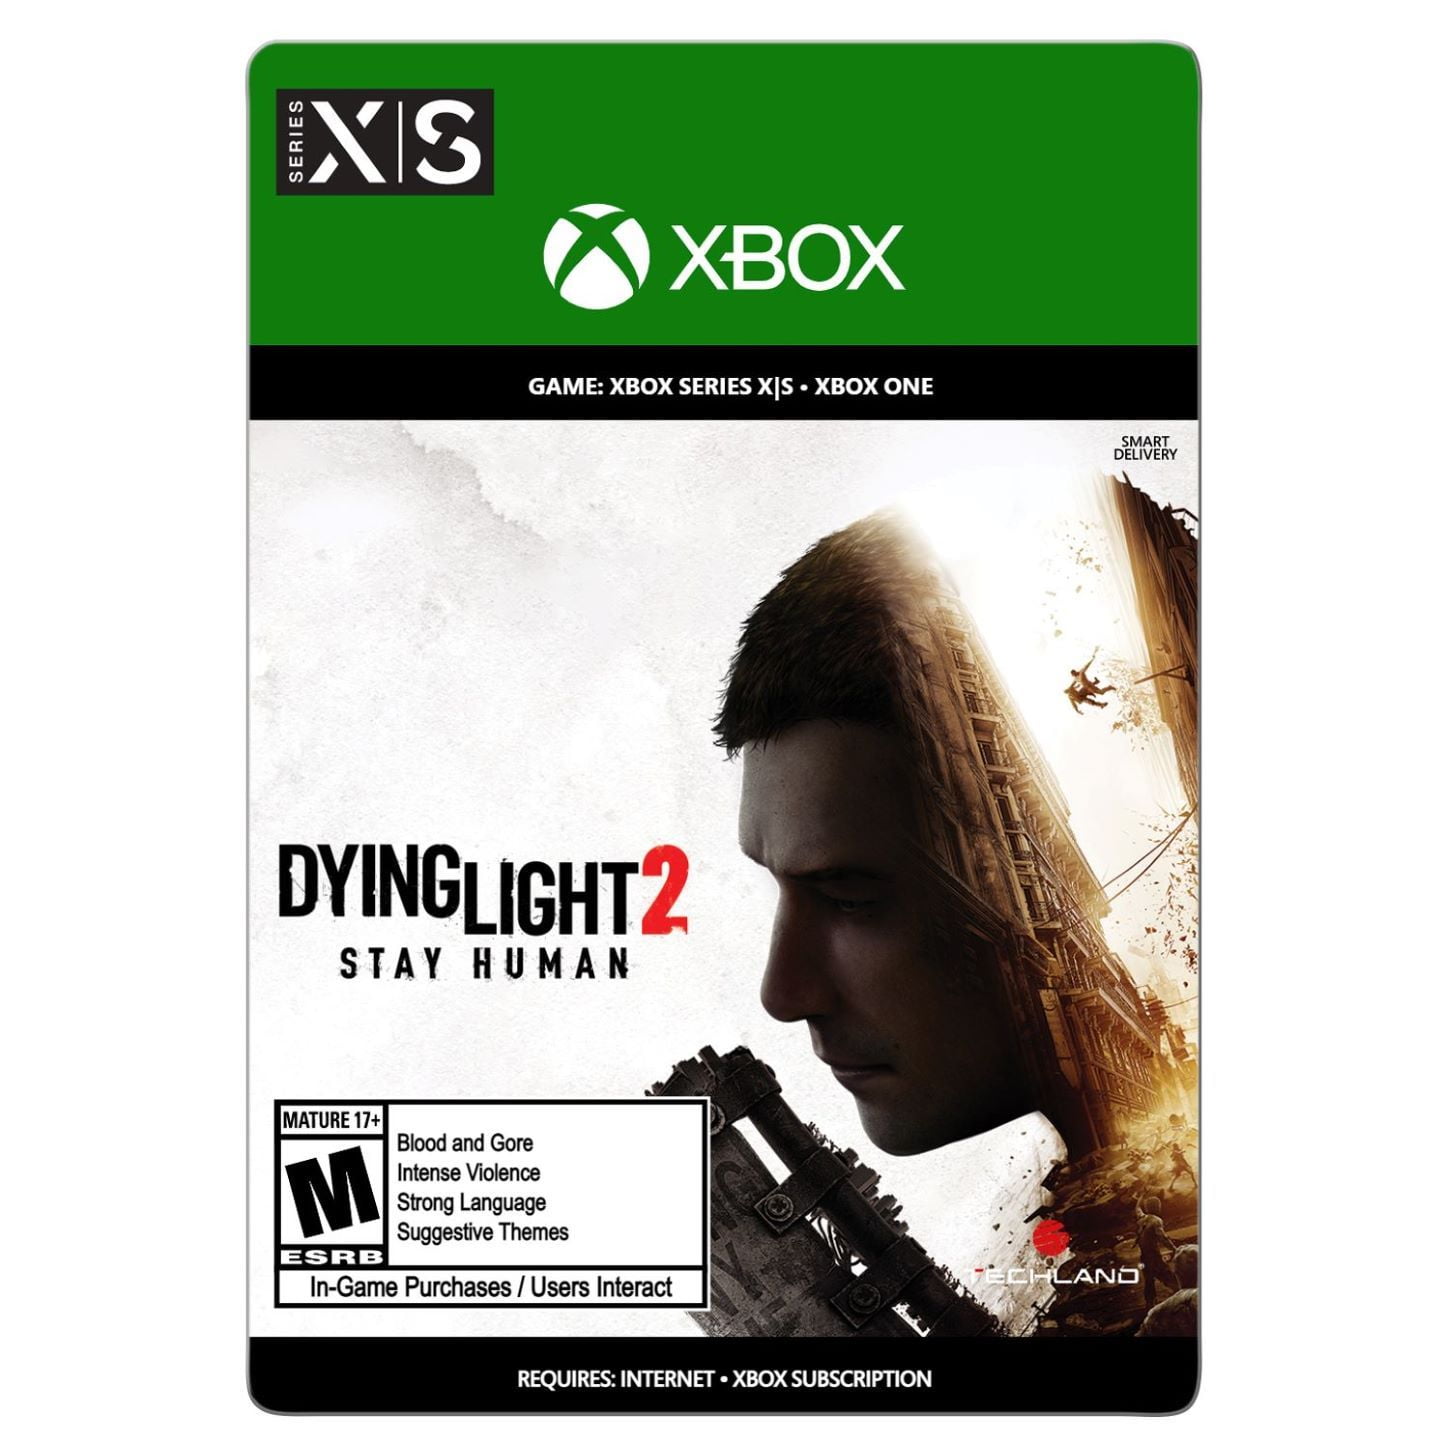 Dying Light 2 Stay Human (PS5) (w/ Walmart Art Cards) - BRAND NEW SEALED!  662248925691